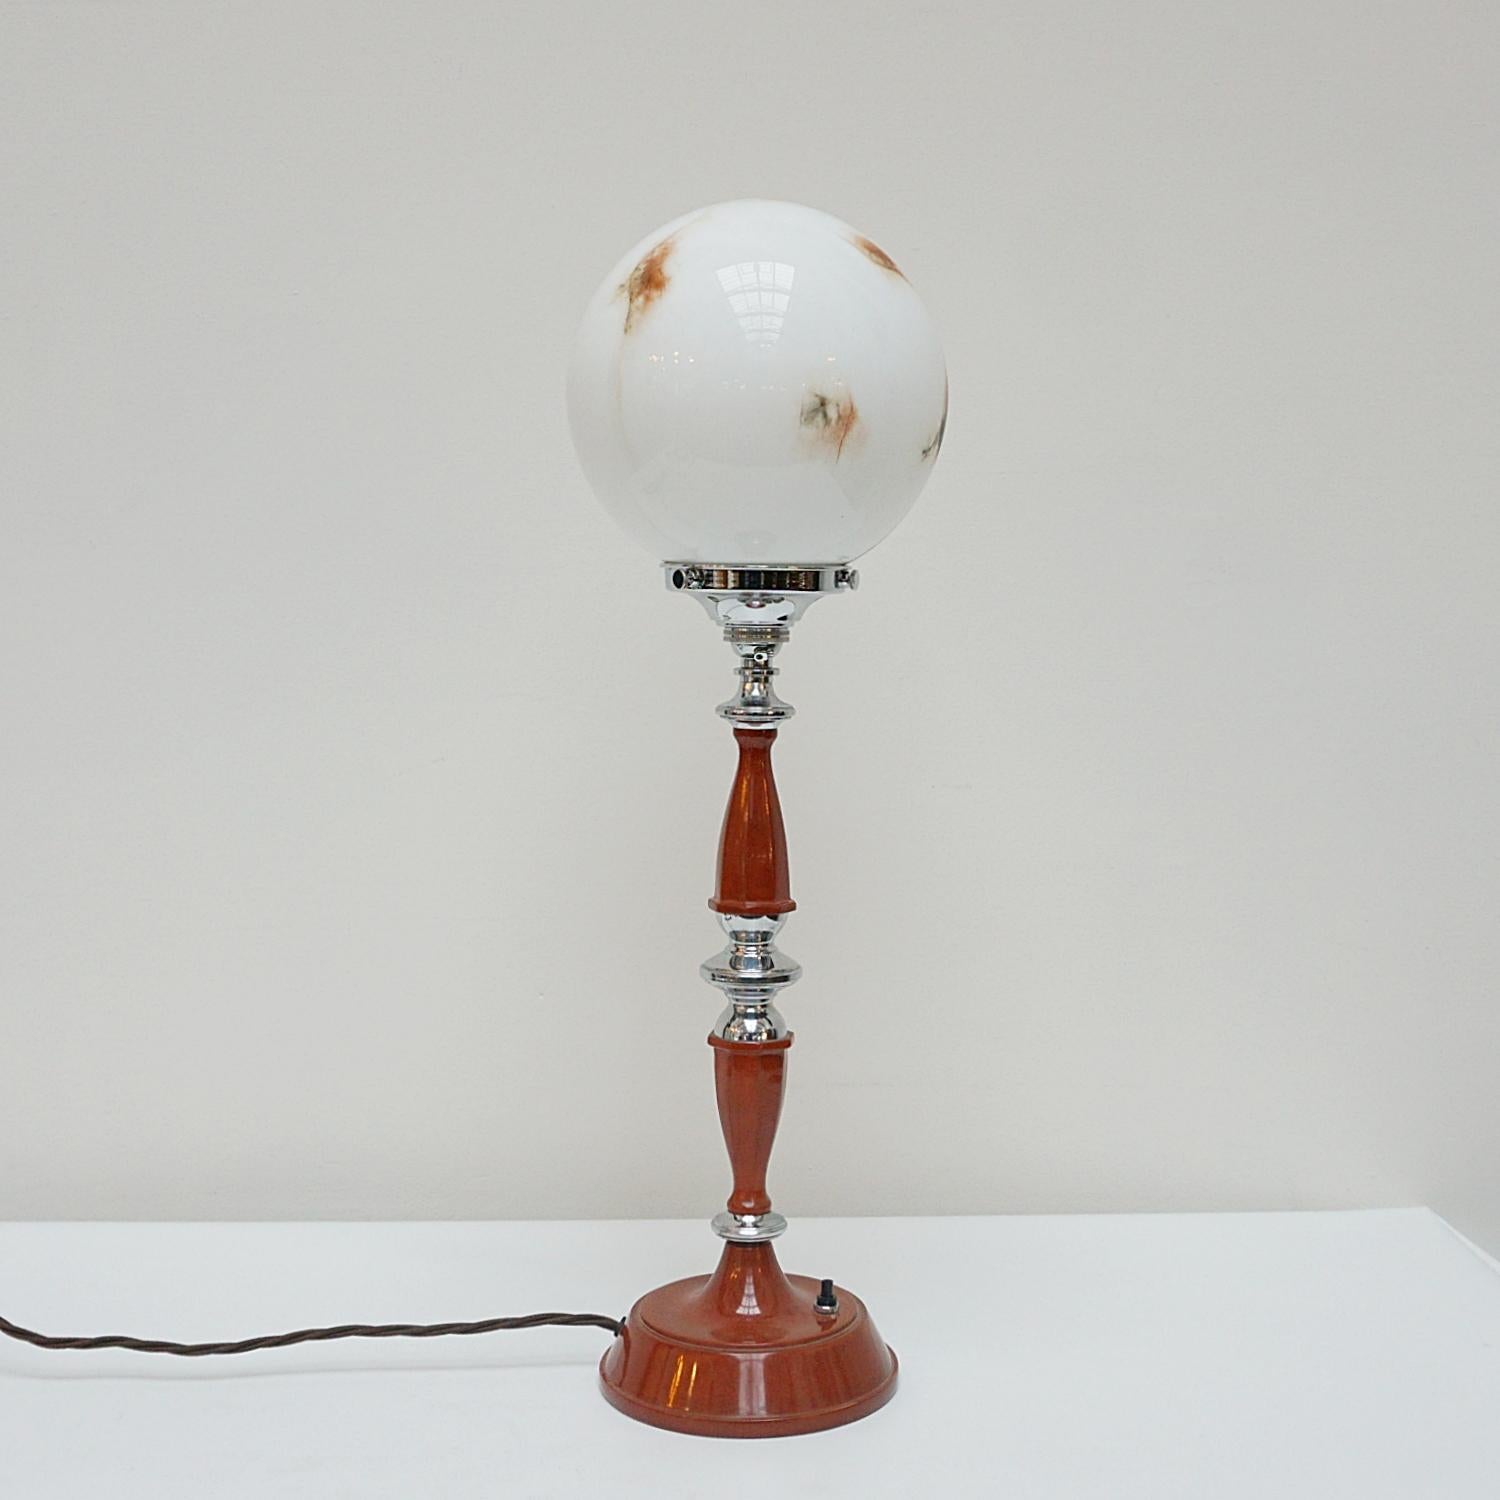 An original Art Deco lamp. Feathered glass globe shade with redded bakelite and chrome stem. 

Dimensions: H 56cm W 15cm

Origin: English

Item Number: J306

All of our lighting is fully refurbished, re-wired, and re-chromed with some replacement